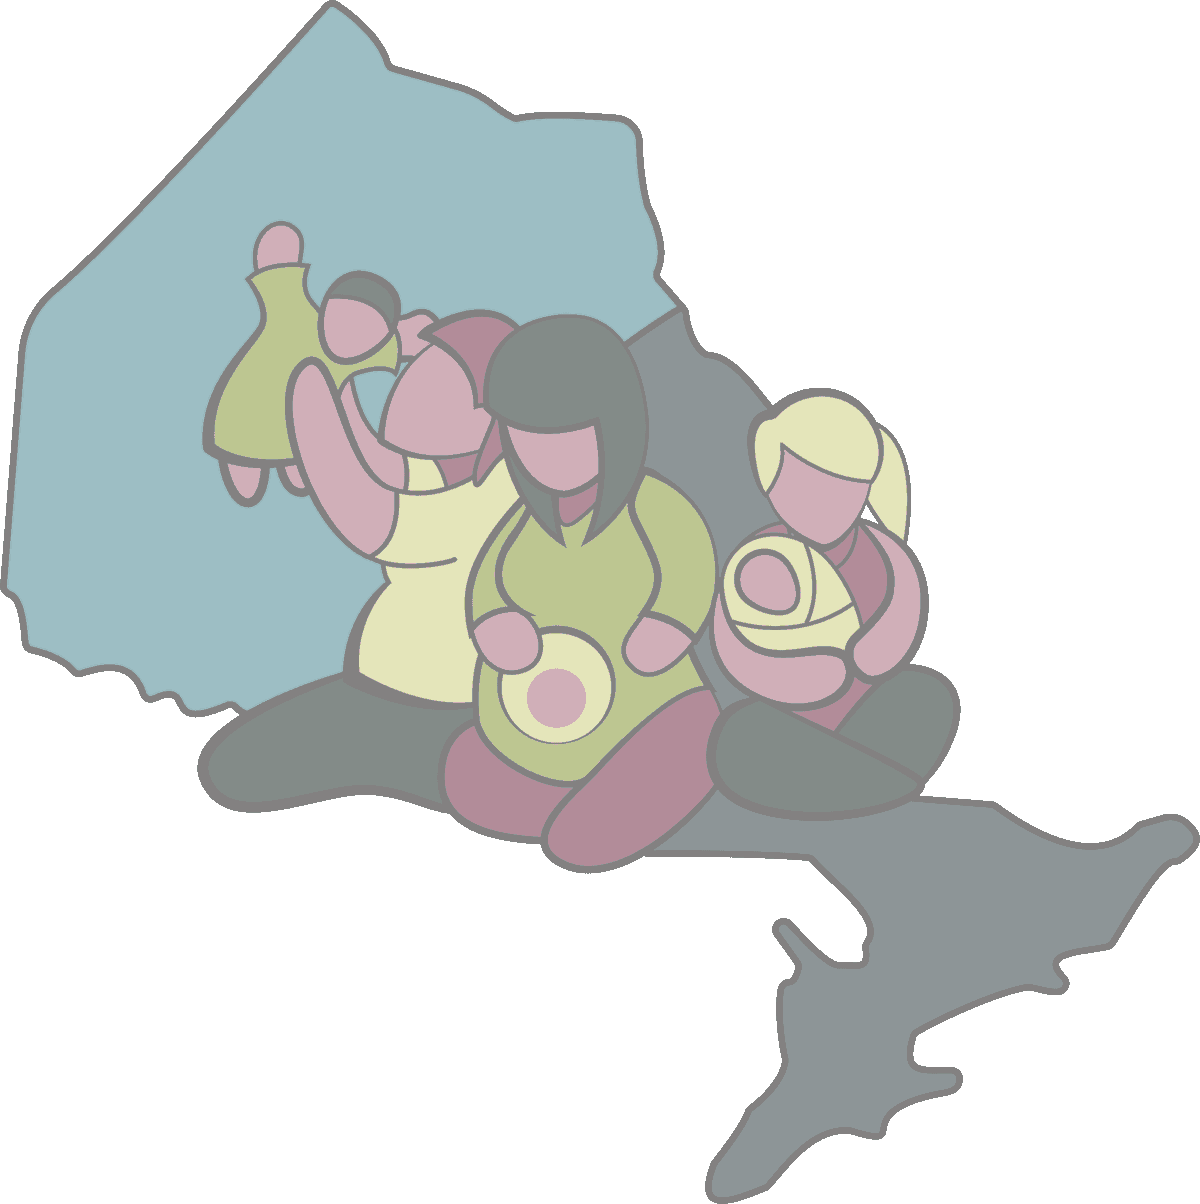 women with babies in northern ontario illustration